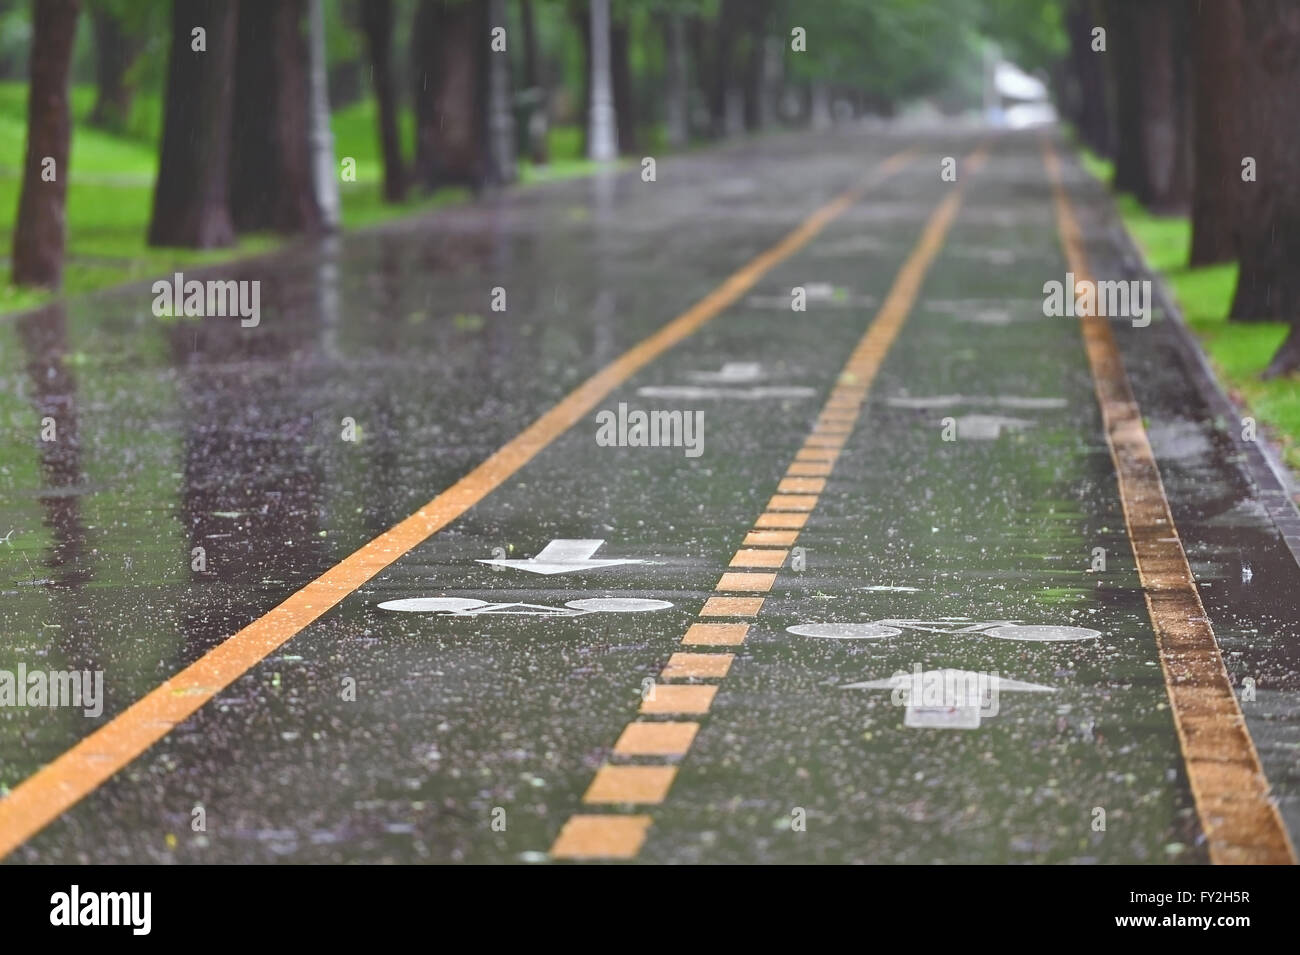 Rainfall on bicycle lanes in a park in springtime Stock Photo